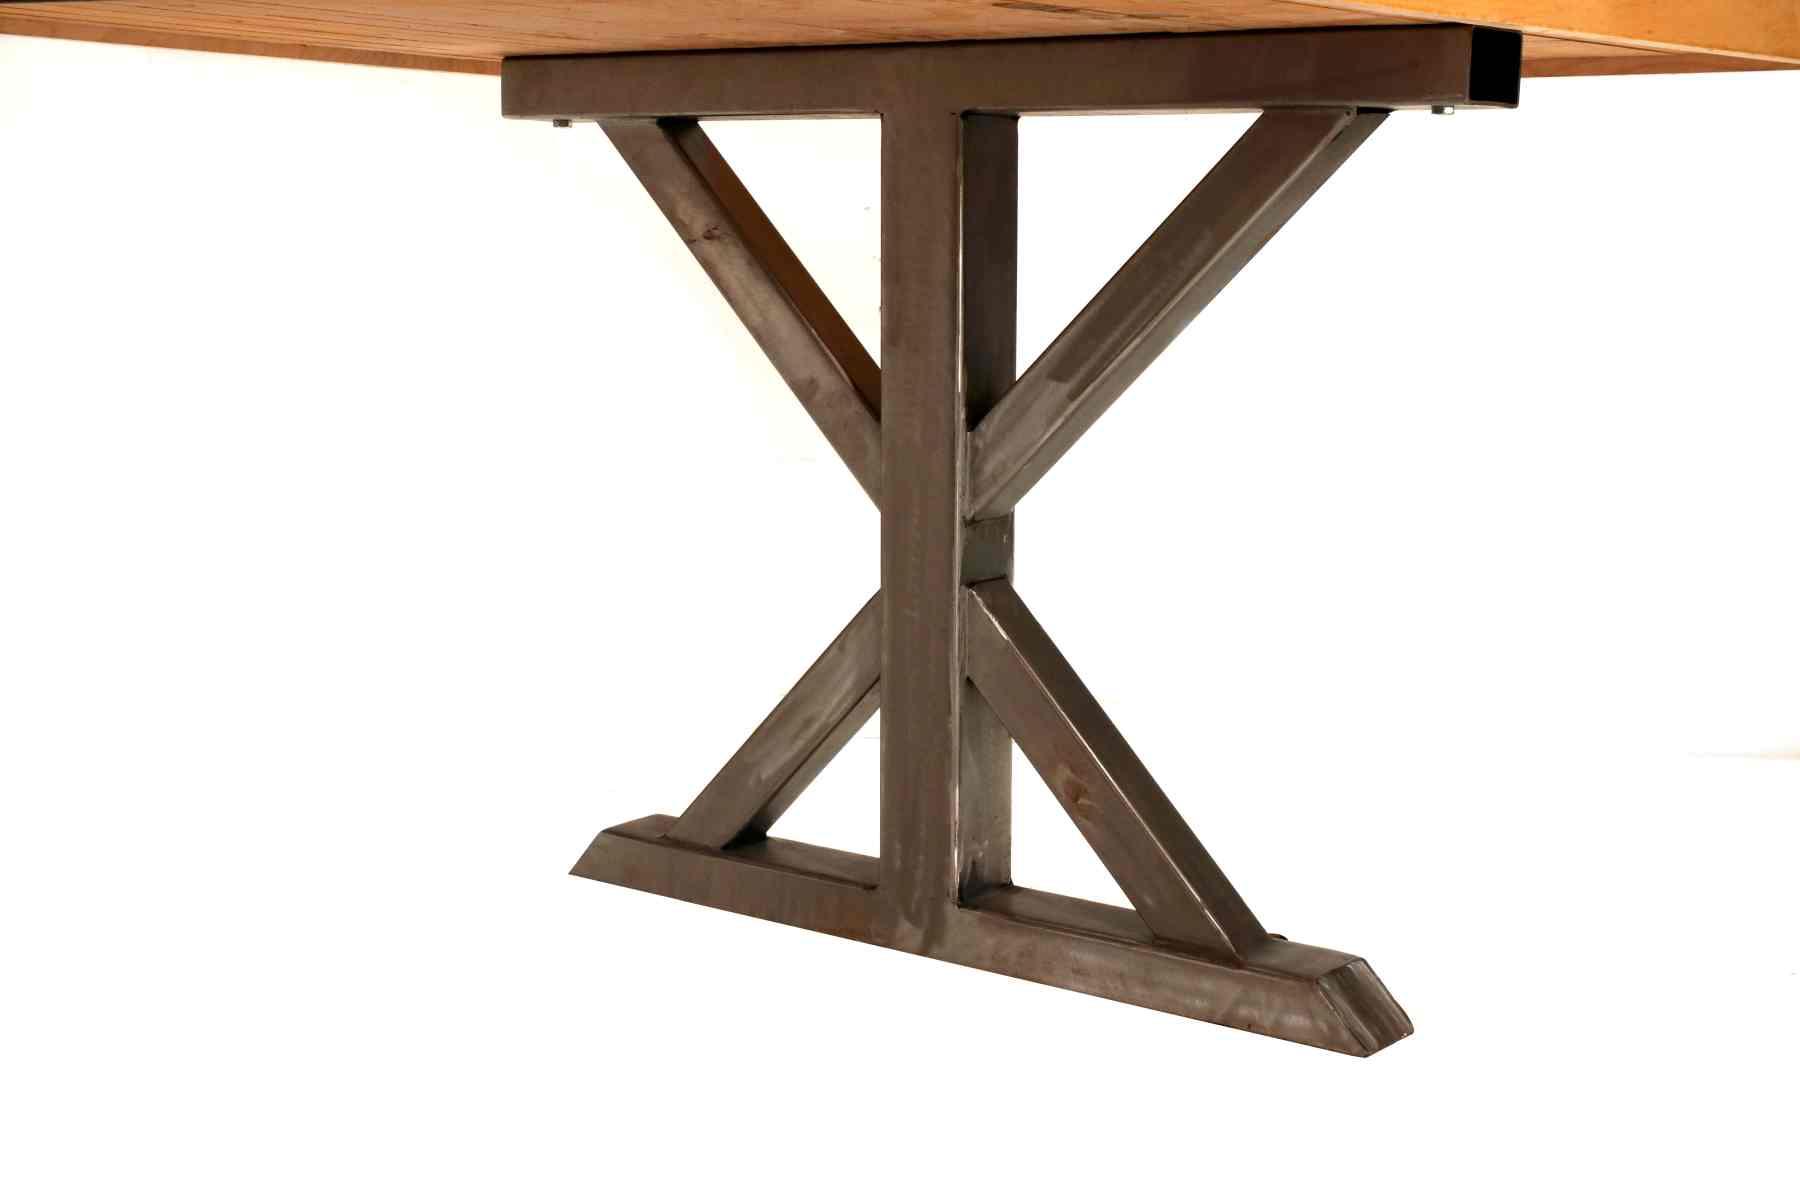 TABLE CRAFTED FROM KING LOUIS BOWLING ALLEY FLOOR